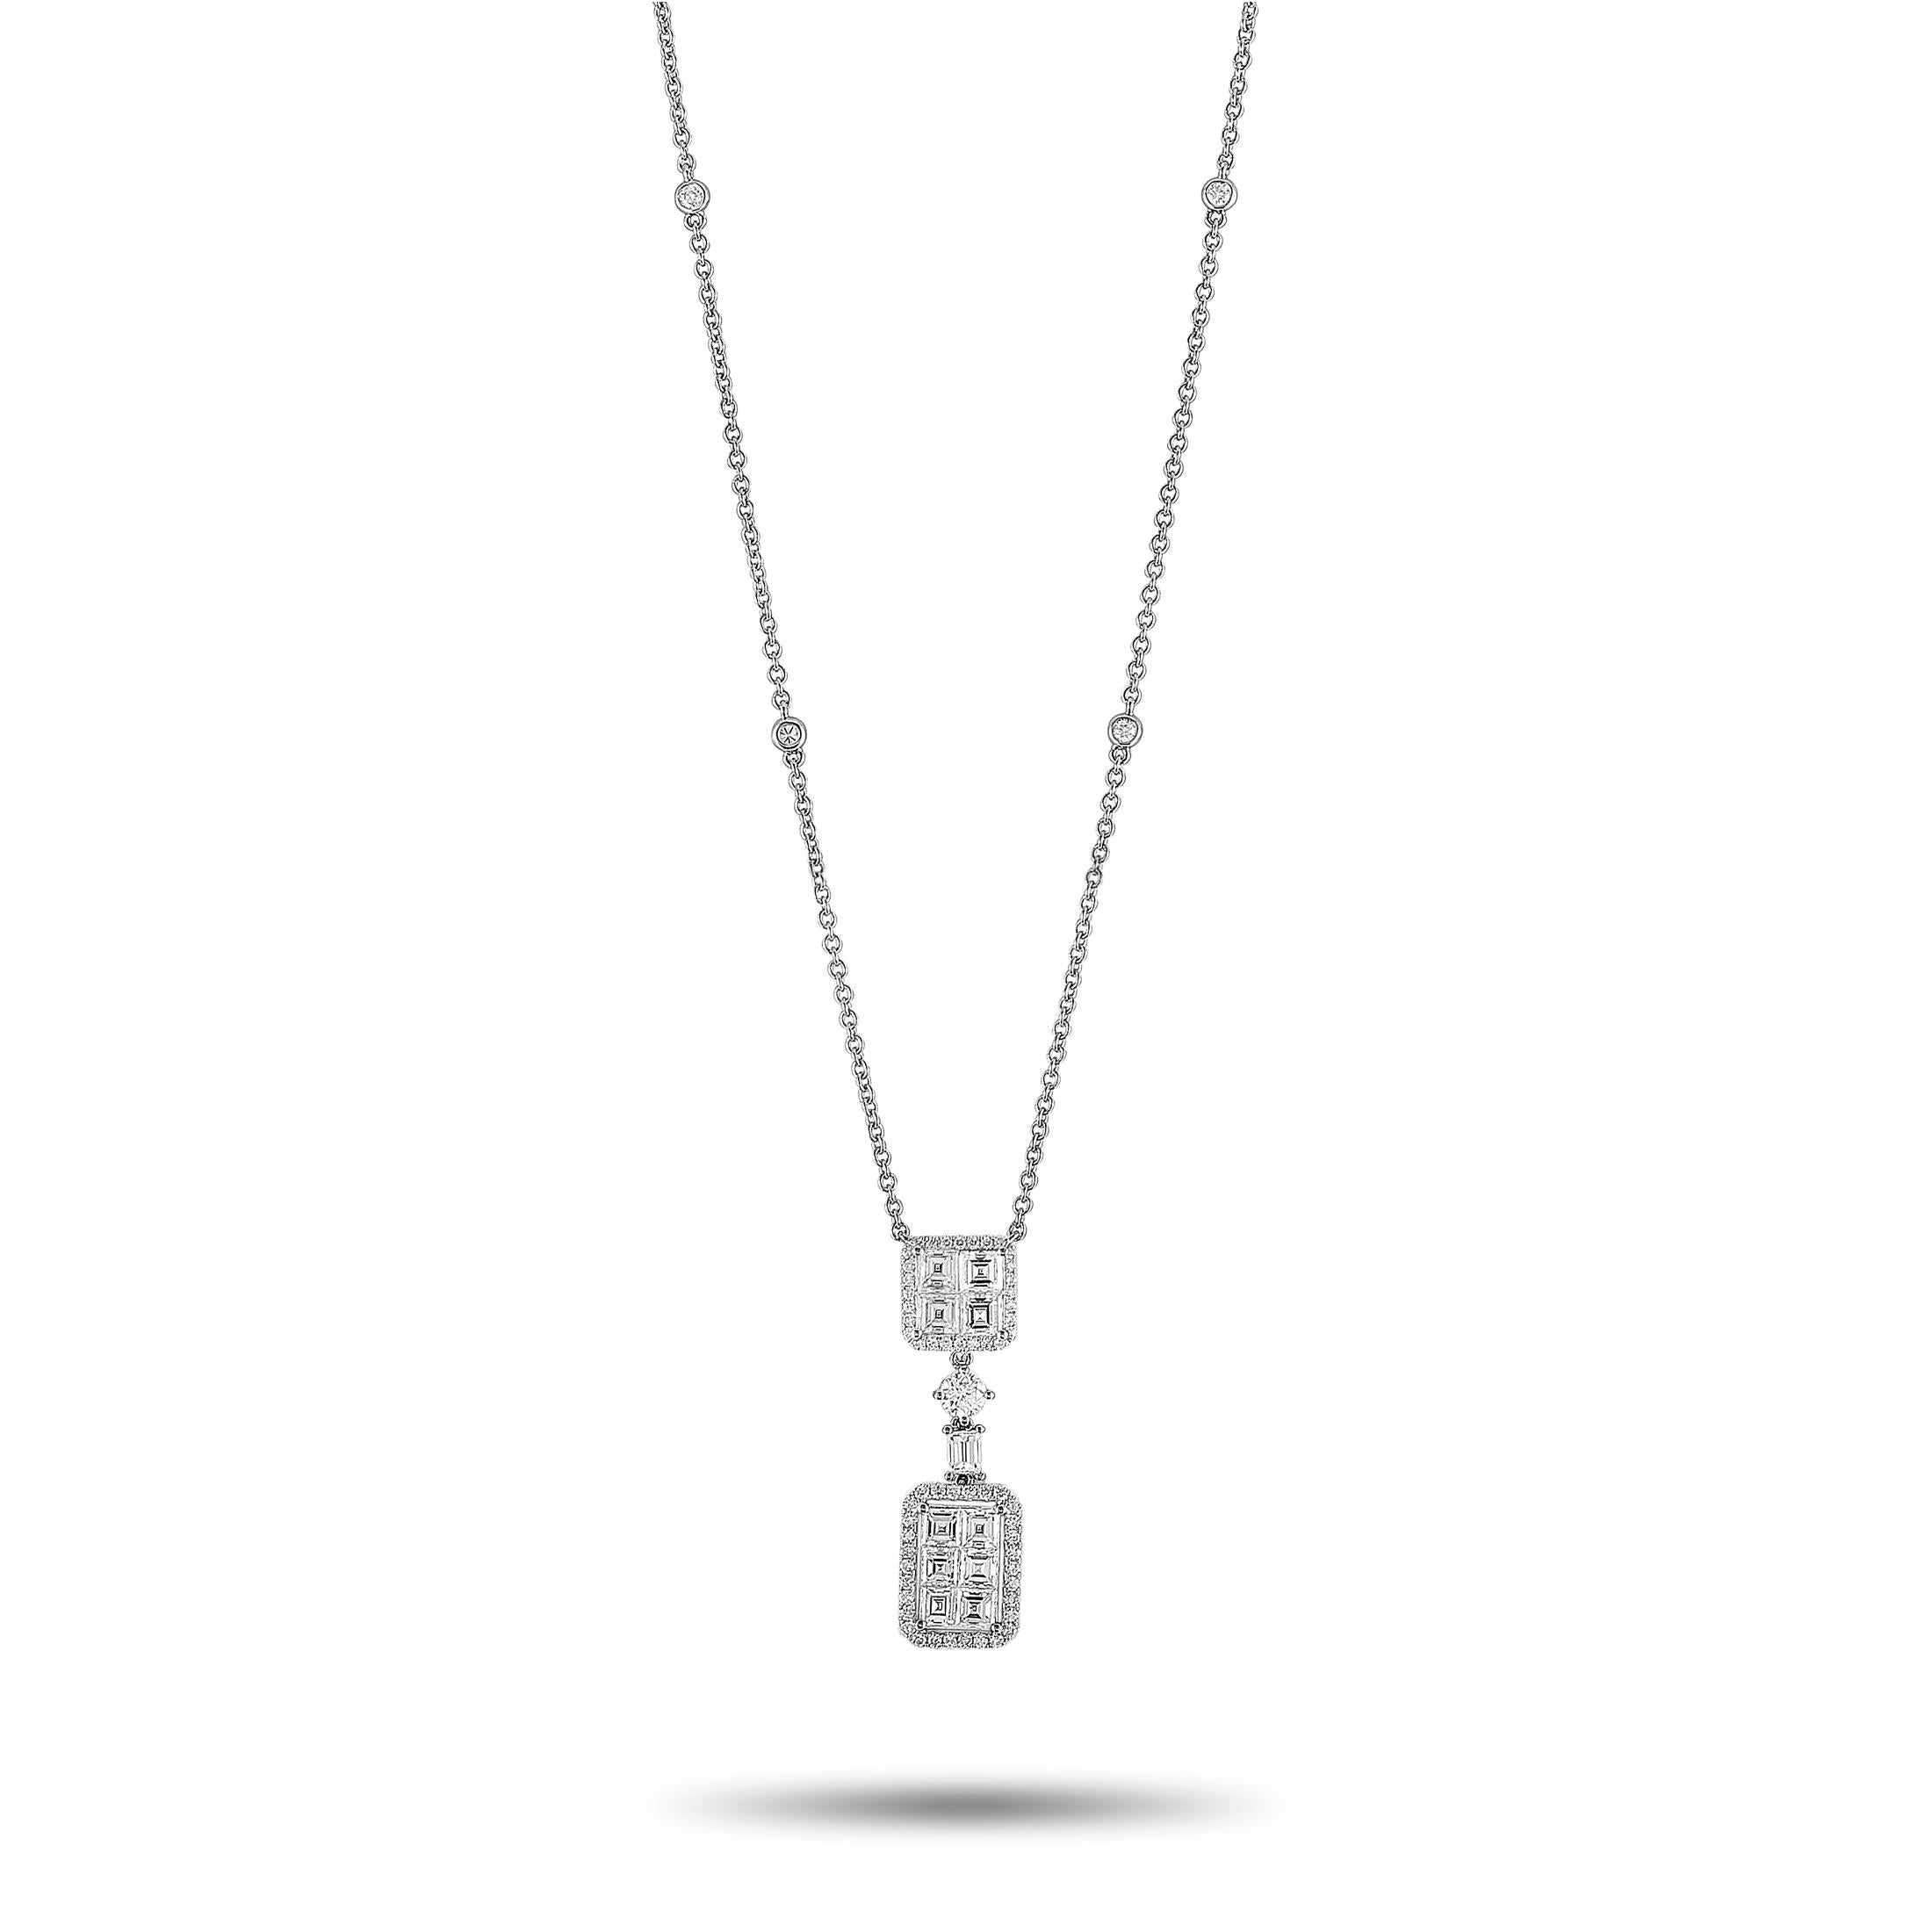 This LB Exclusive necklace is crafted from 18K white gold and set with round and square diamonds that, respectively, total 0.87 and 2.48 carats. The necklace weighs 7.3 grams, and boasts a 16” chain and a pendant that measures 1.37” in length and